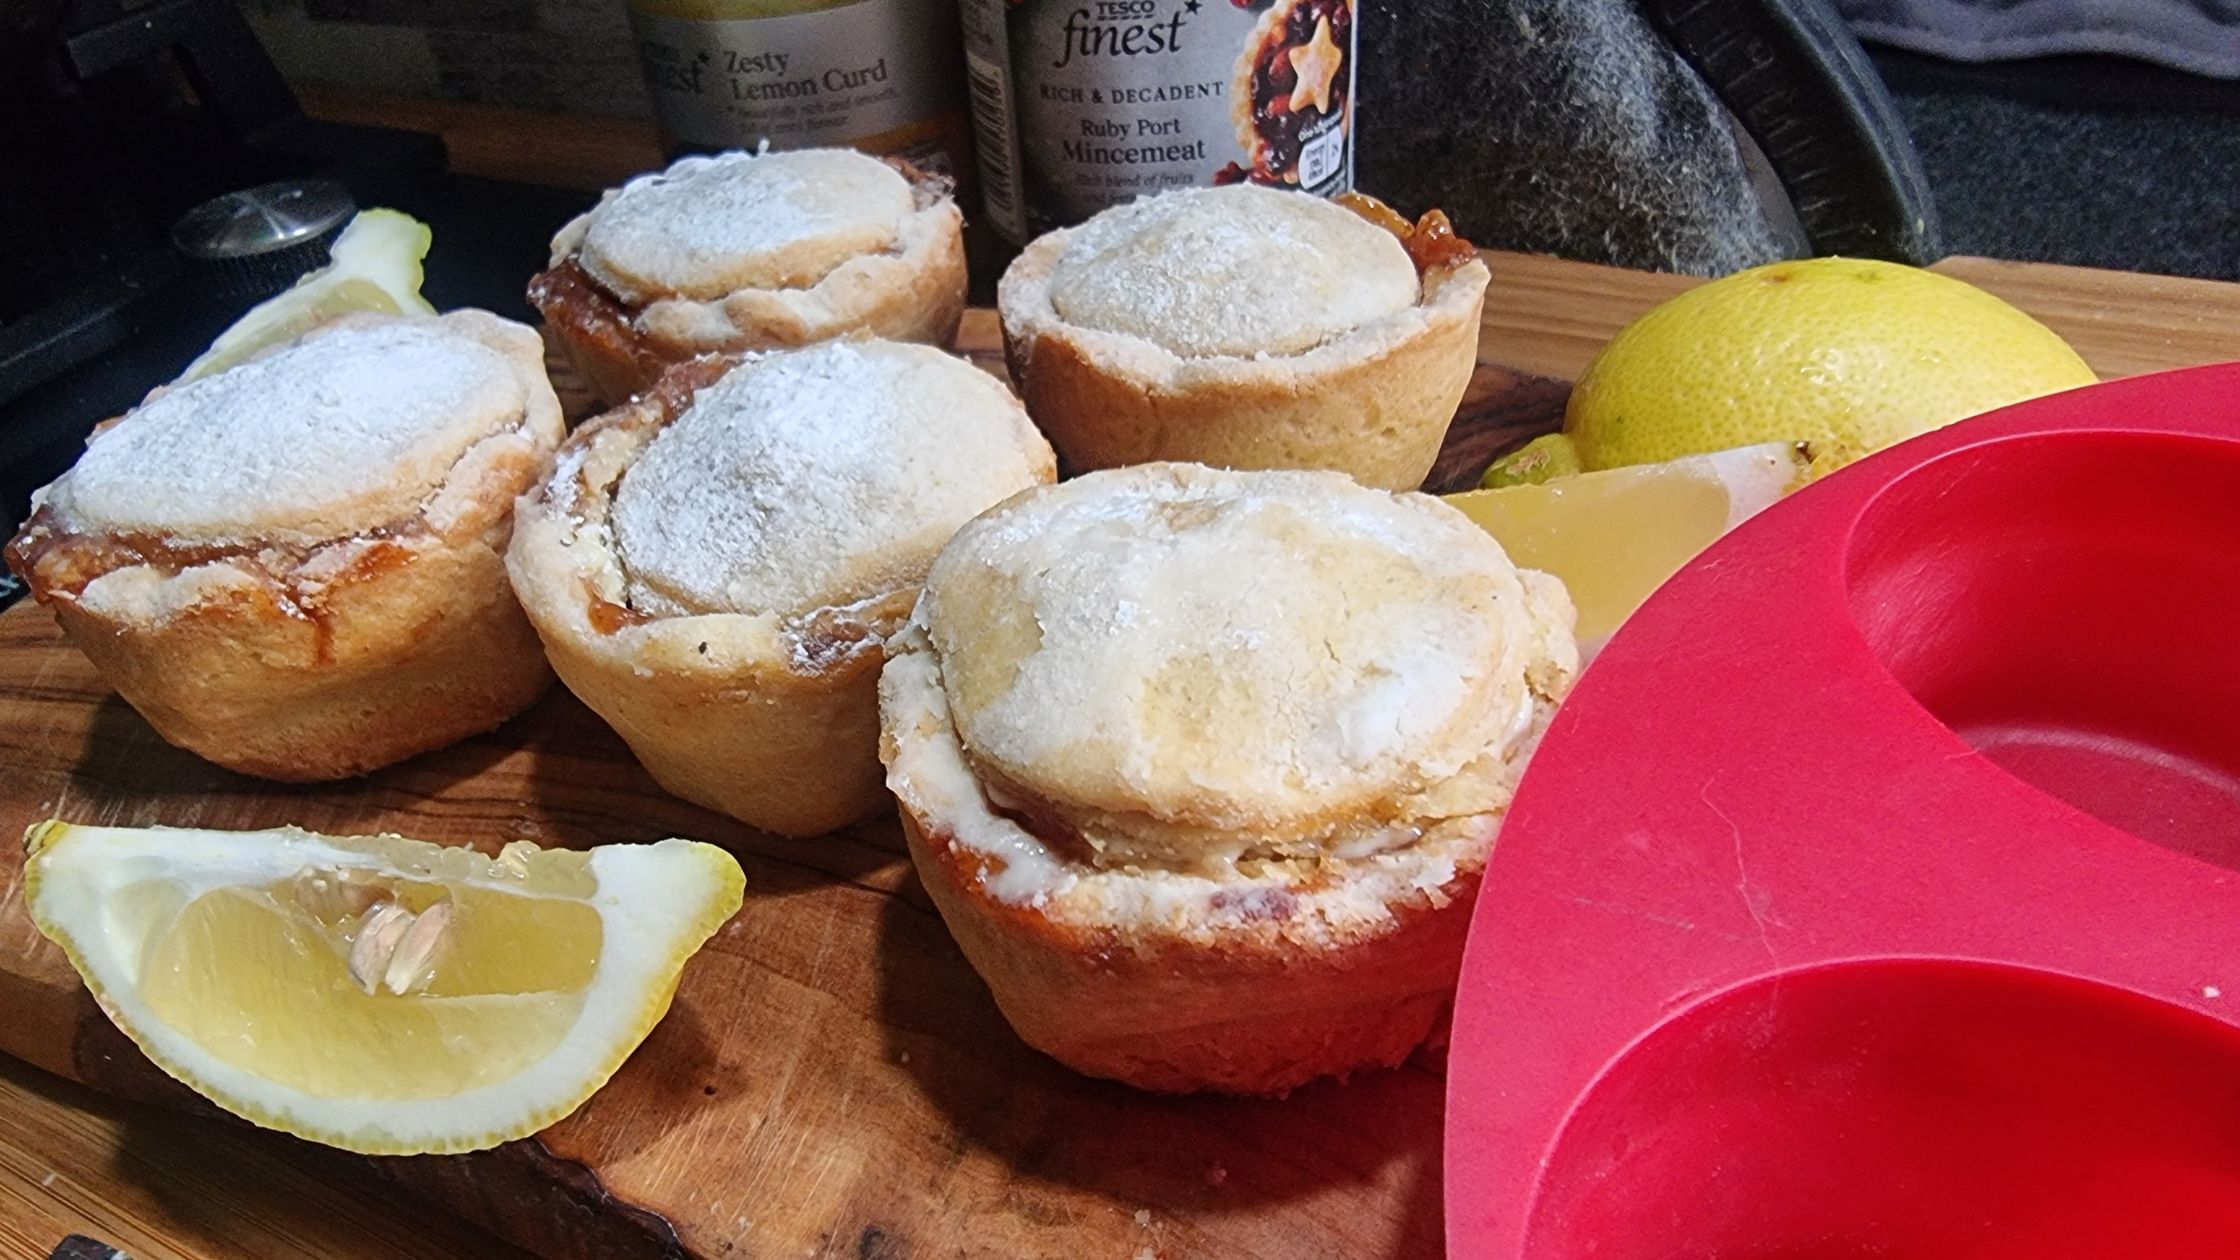 mince pies with masarpone cheese